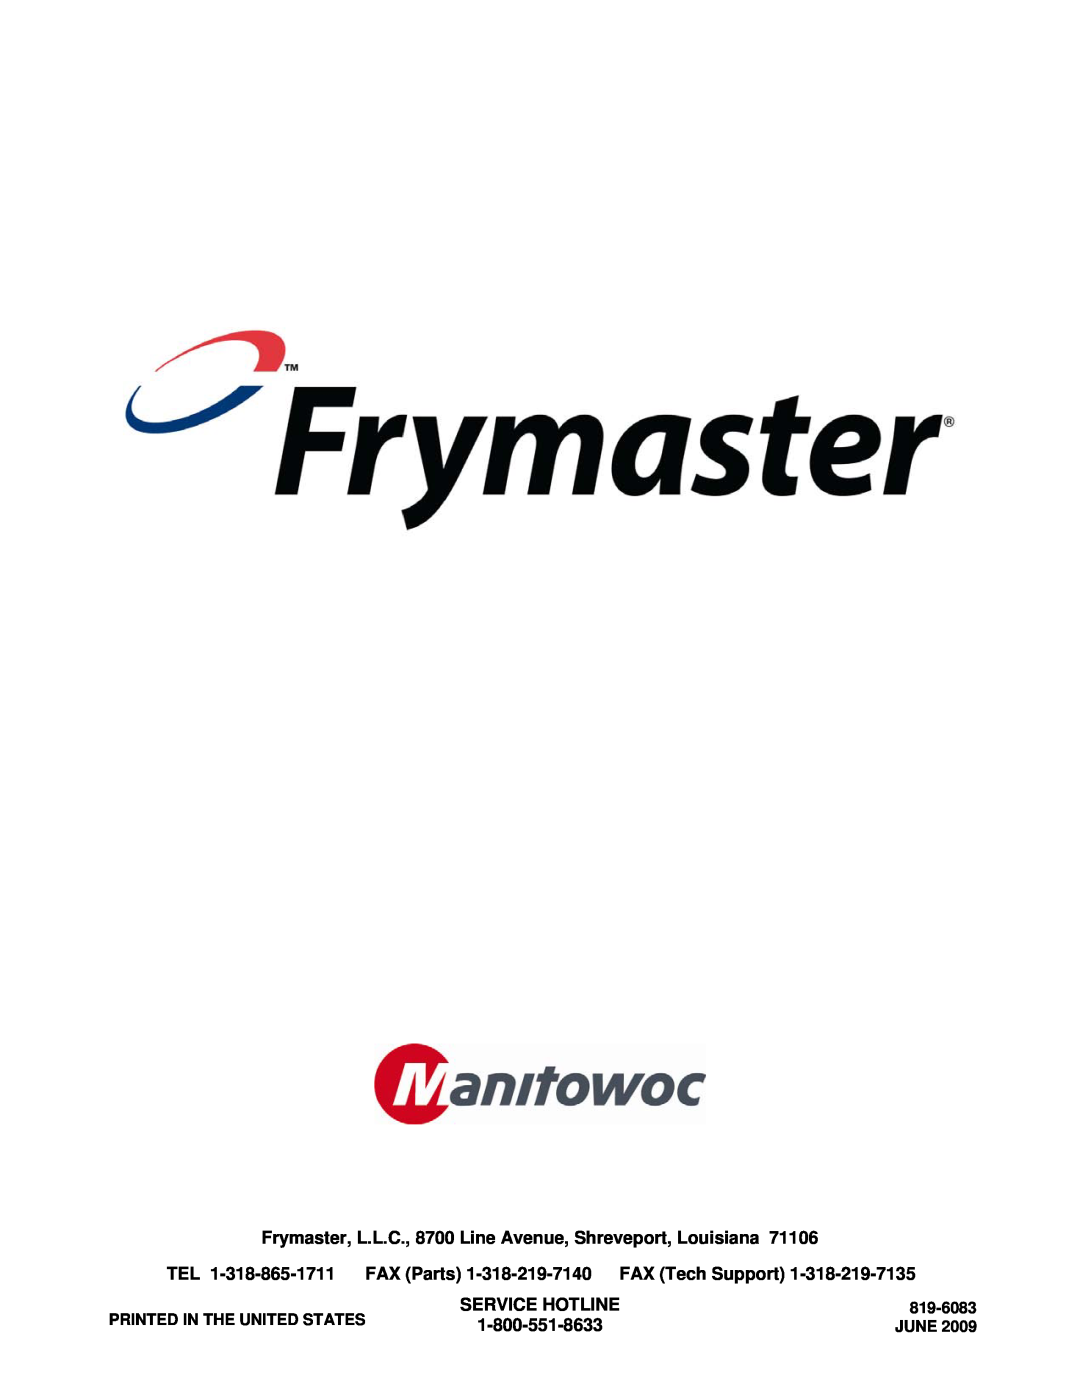 Frymaster H50 manual Service Hotline, 1-800-551-8633, Printed In The United States, 819-6083, June 